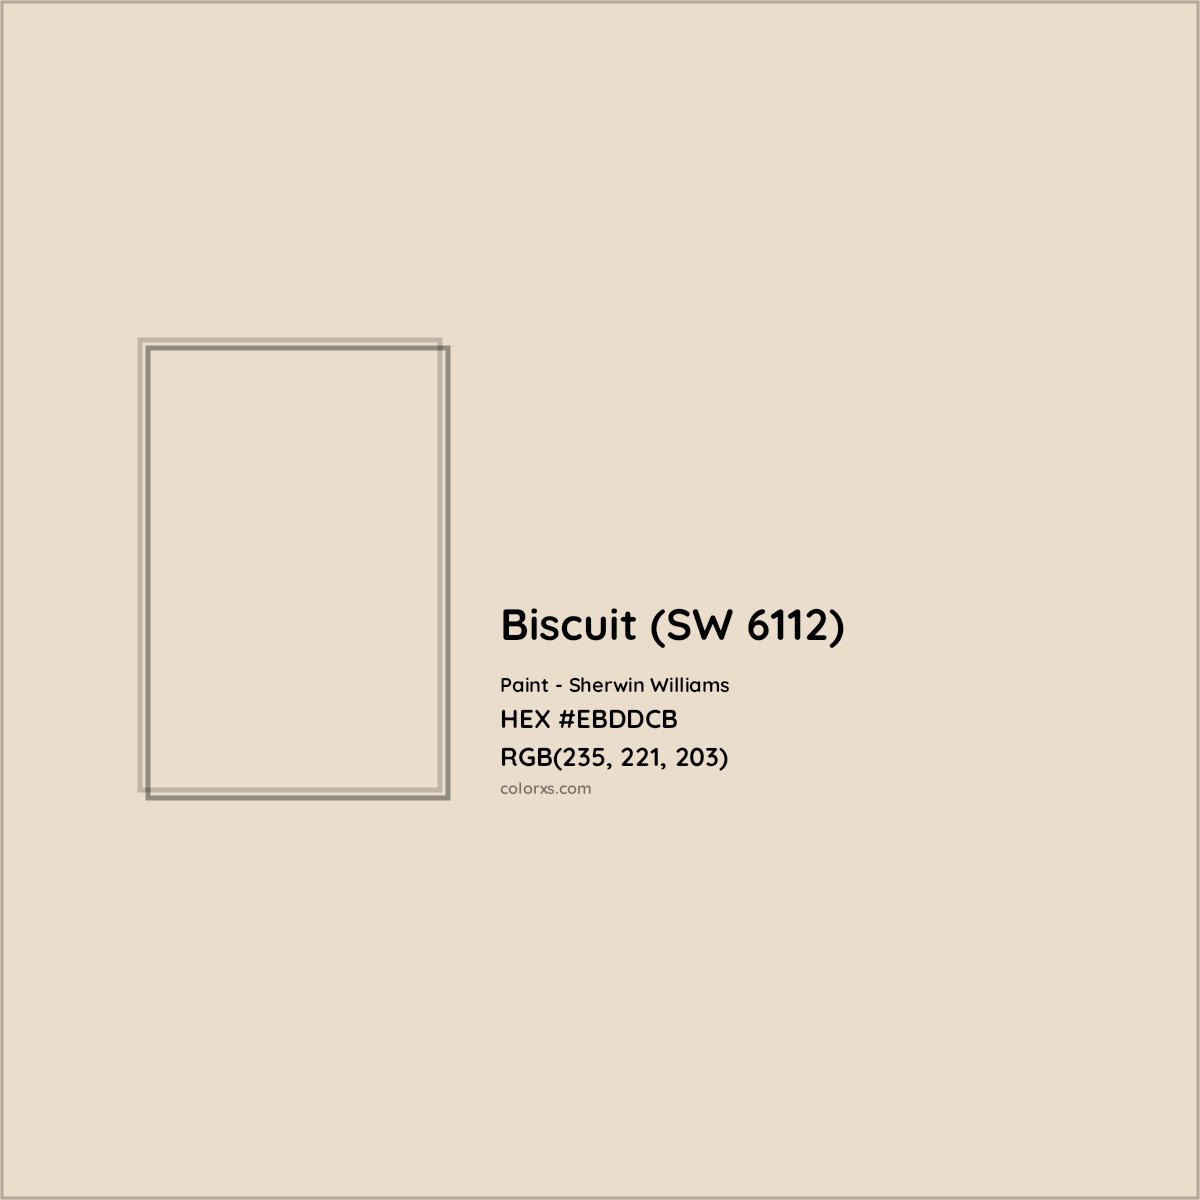 HEX #EBDDCB Biscuit (SW 6112) Paint Sherwin Williams - Color Code